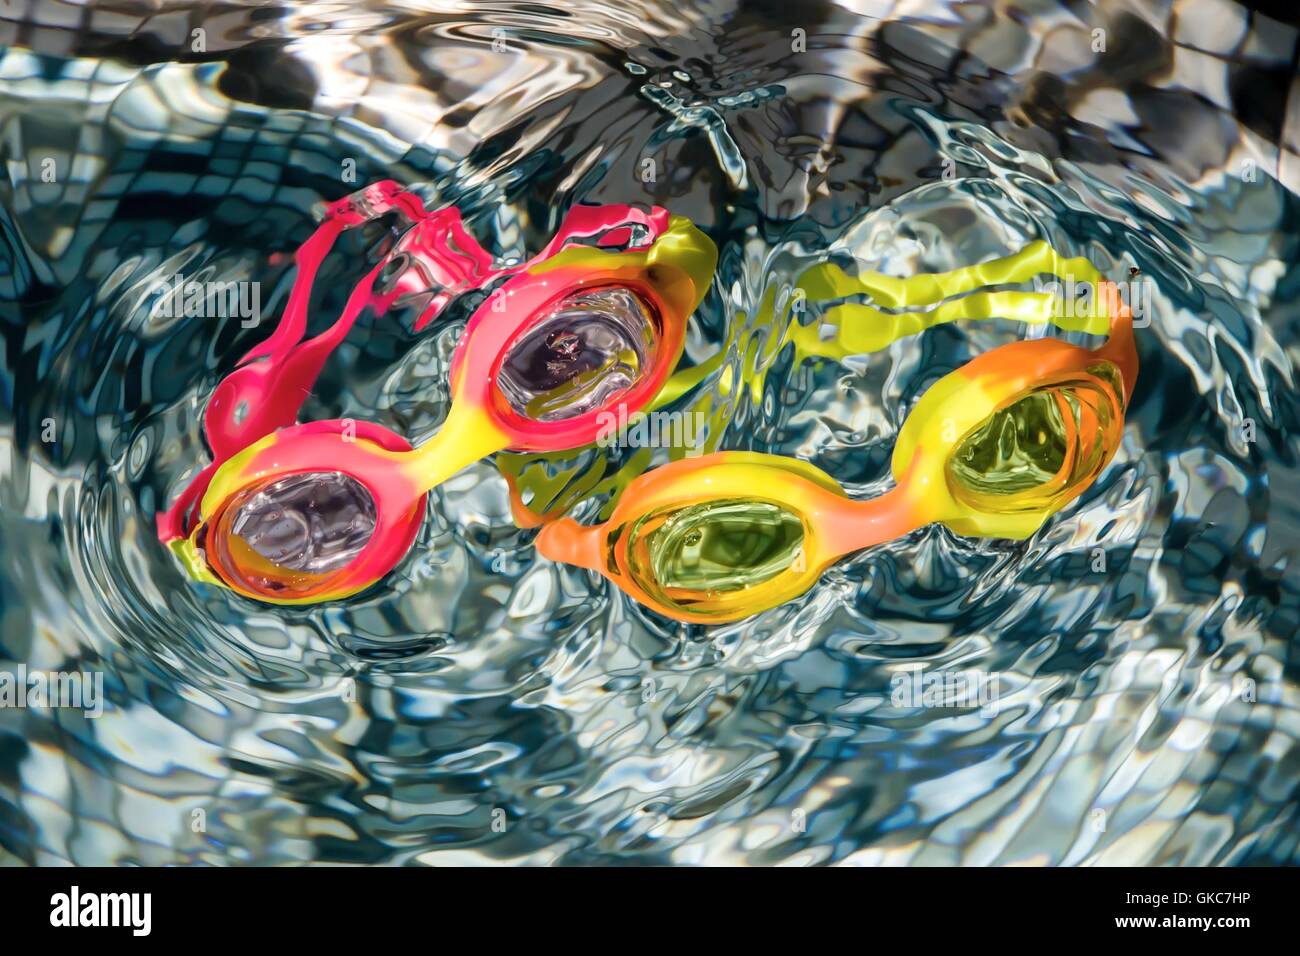 Two very colorful swimming goggles floating in swimming pool to create a beautiful abstract image. Ideal for large print. Stock Photo